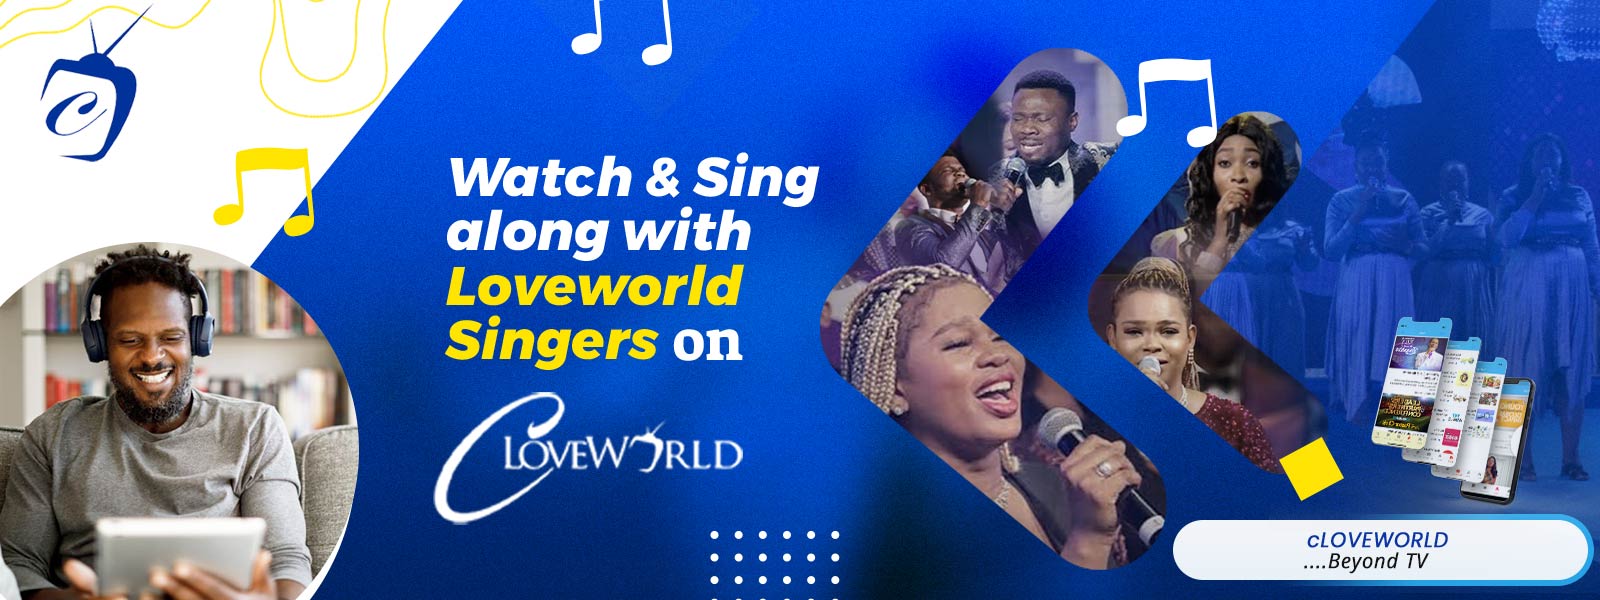 WATCH AND SING ALONG WITH LOVWORLD SINGERS